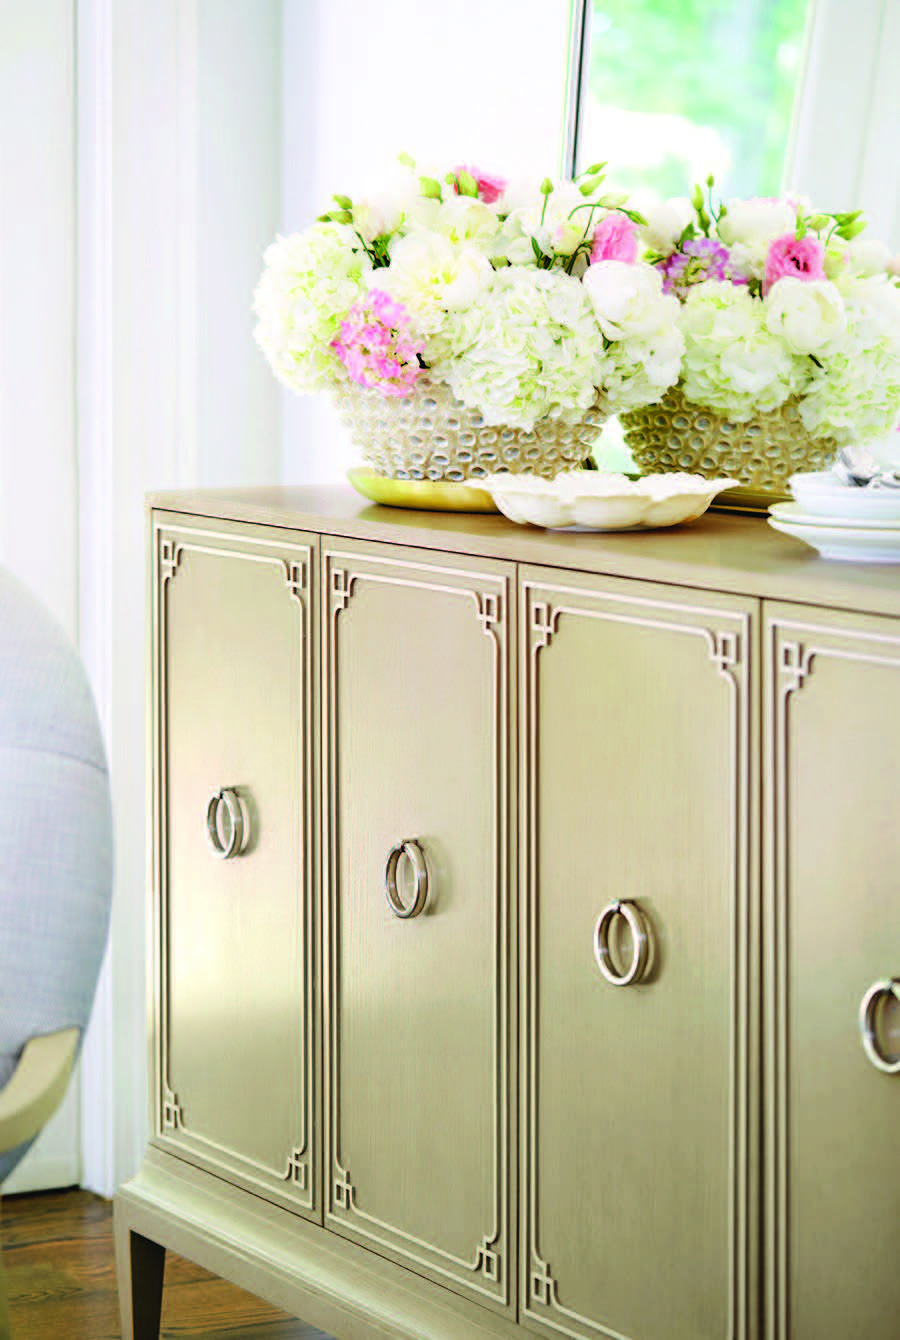 Spring Has Sprung! Tips for Updating Your Decor for Spring